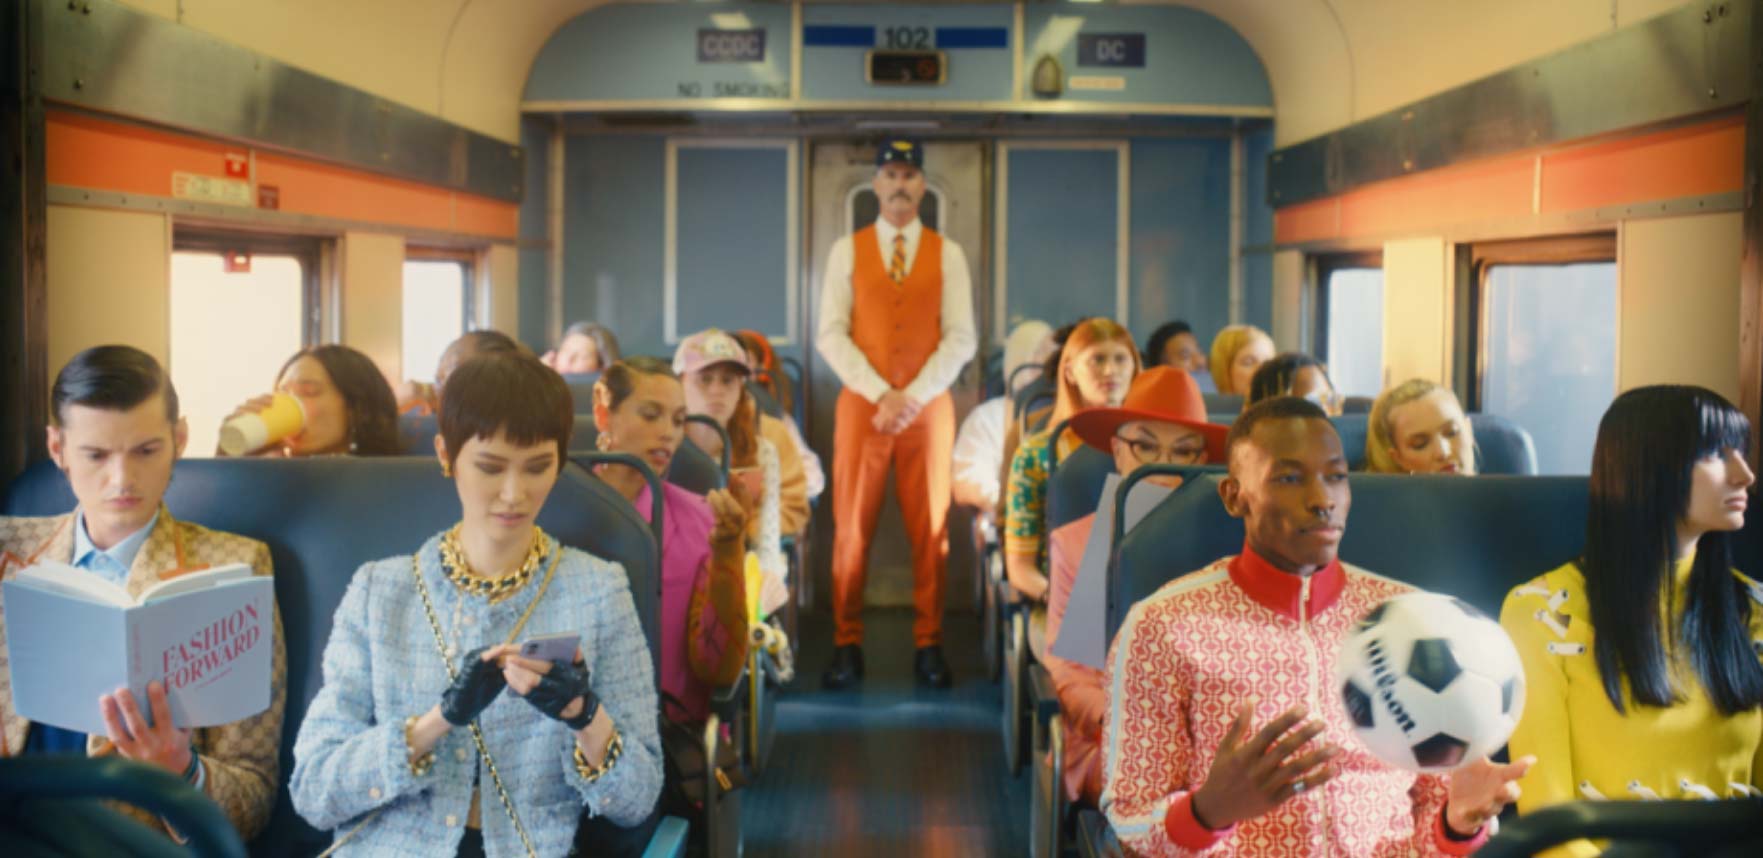 Passengers sit on a train as a conductor in an orange suit stands in the background